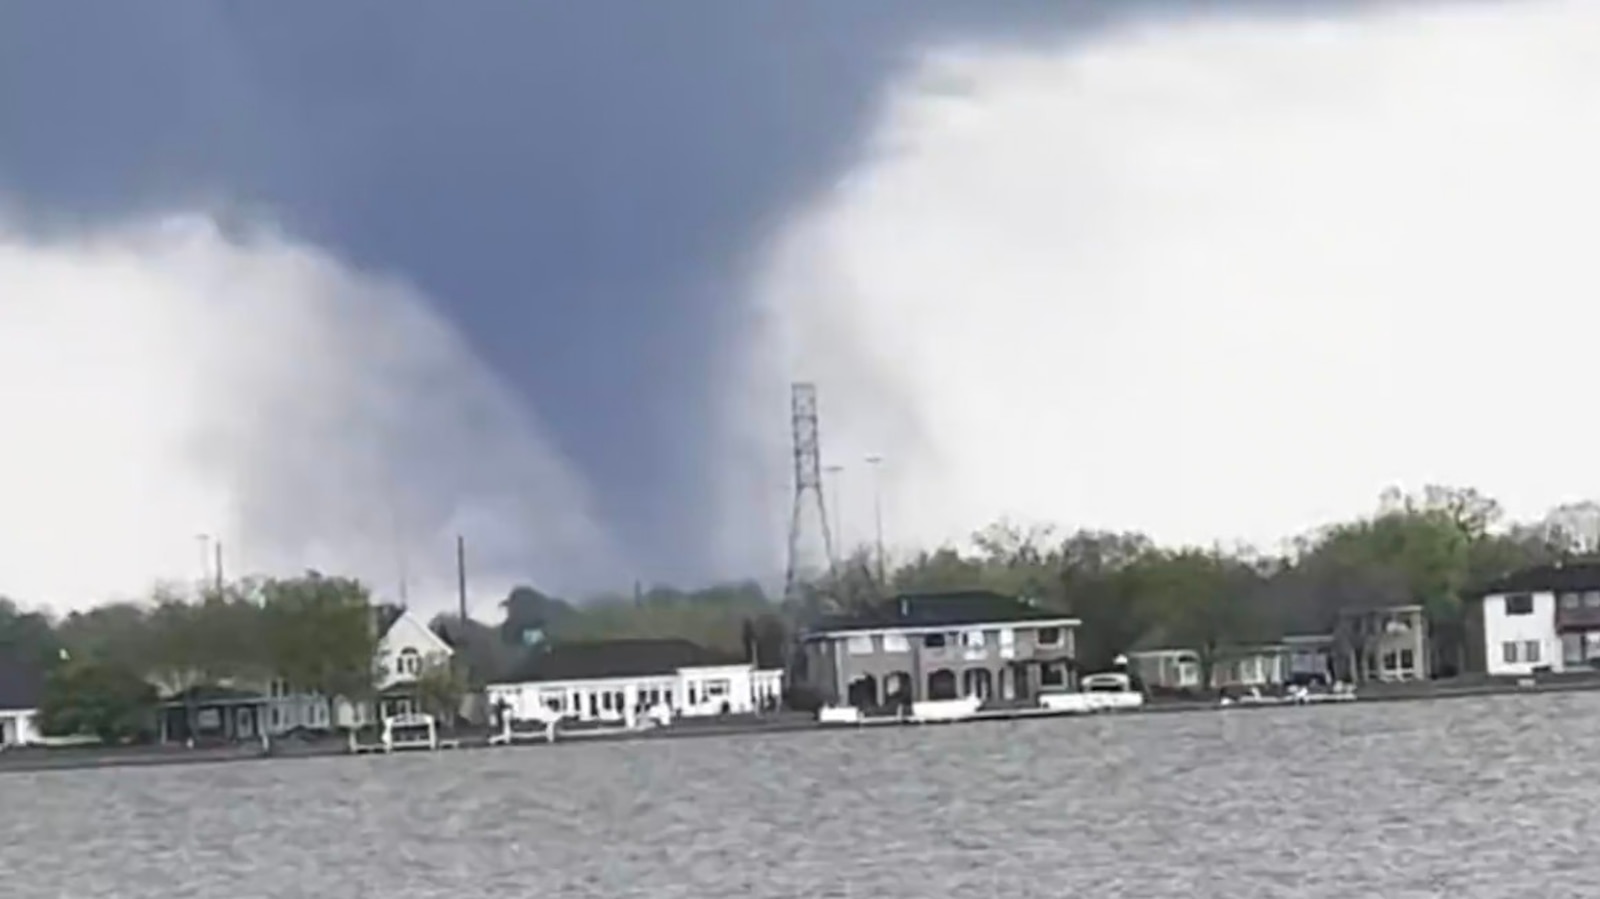 More than 2 dozen reported tornadoes in 3 states amid outbreak in the Plains [Video]